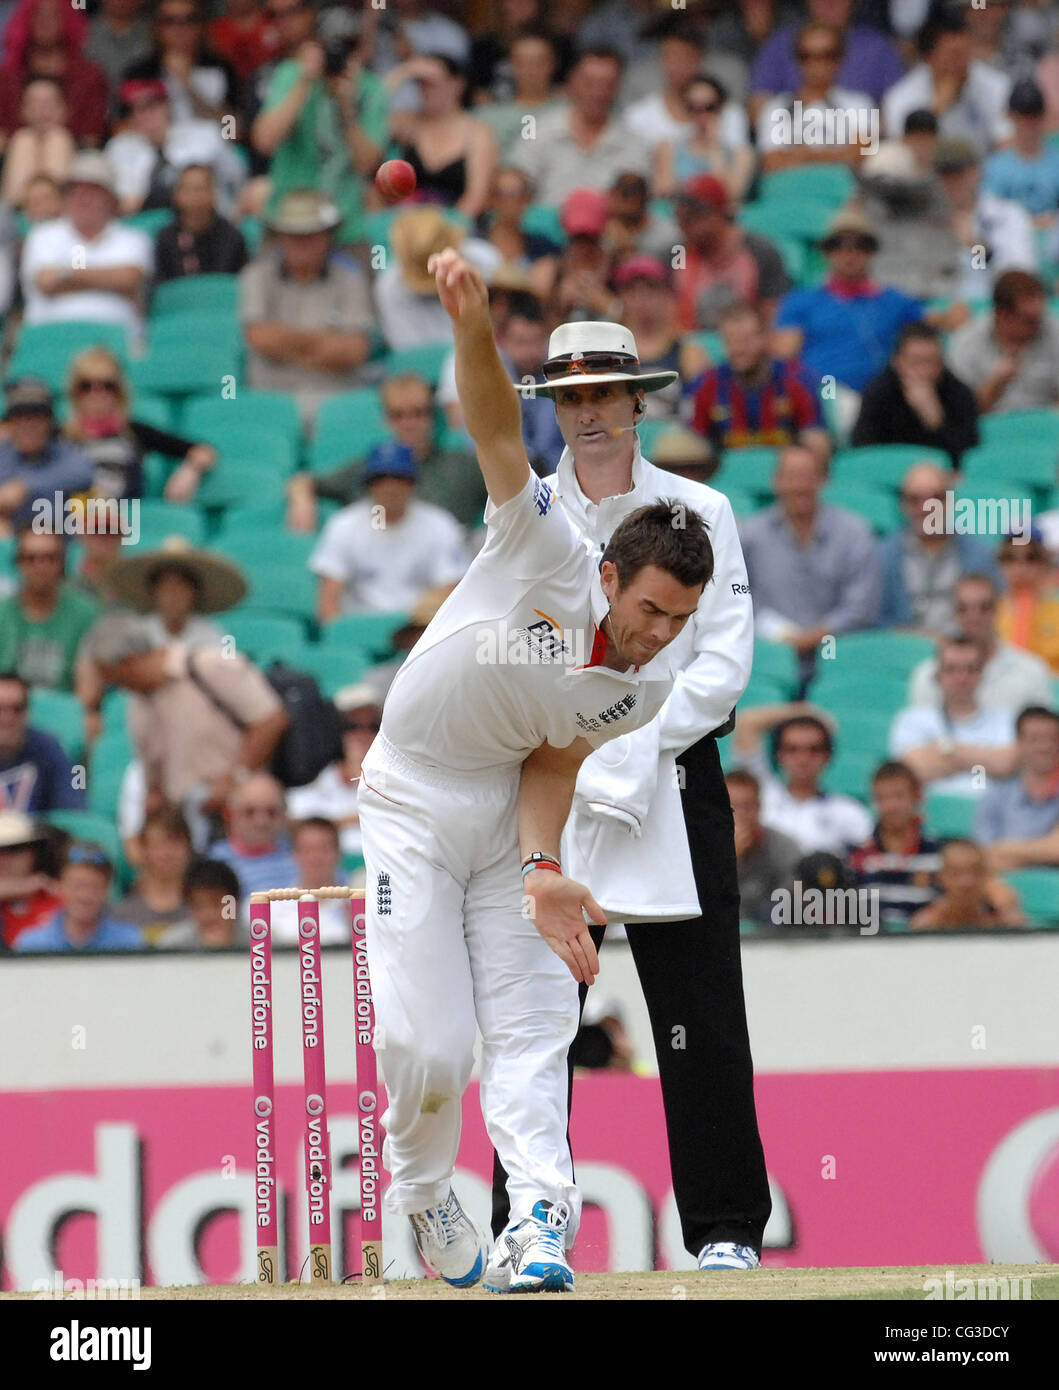 Jimmy Anderson of England,  on day two of the fifth Ashes cricket Test at the Sydney Cricket Ground. England were 145-2 chasing the Australian first innings score of 280 as play continued.  Sydney, Australia - 04.01.11 Stock Photo